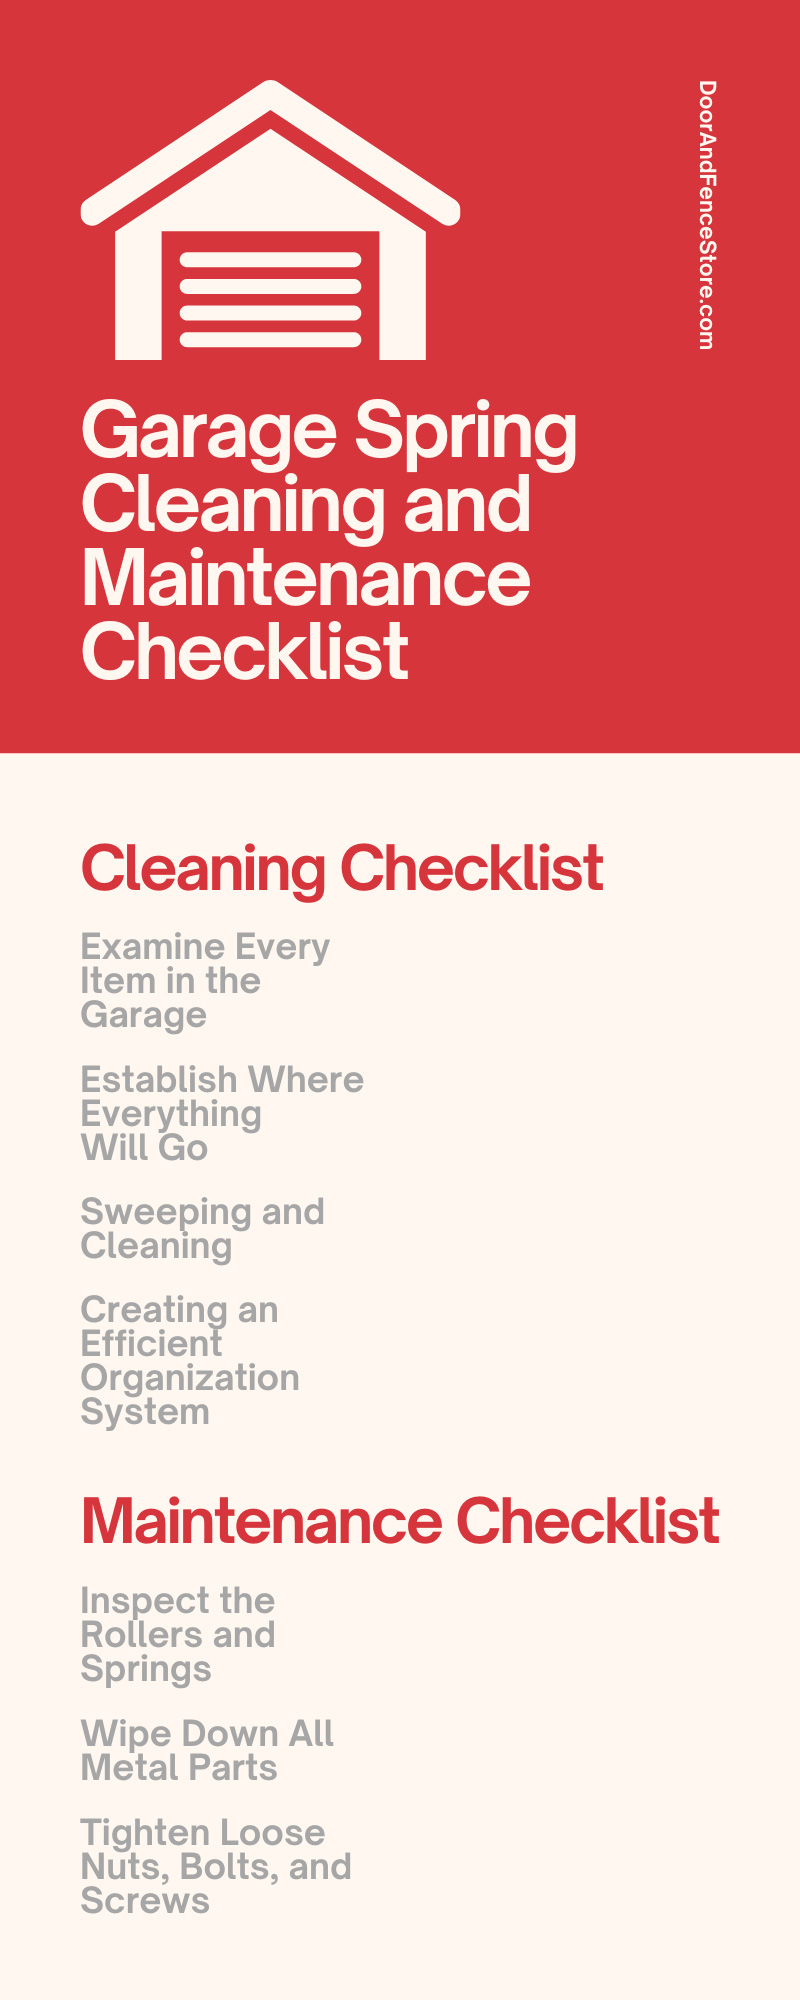 Garage Spring Cleaning and Maintenance Checklist